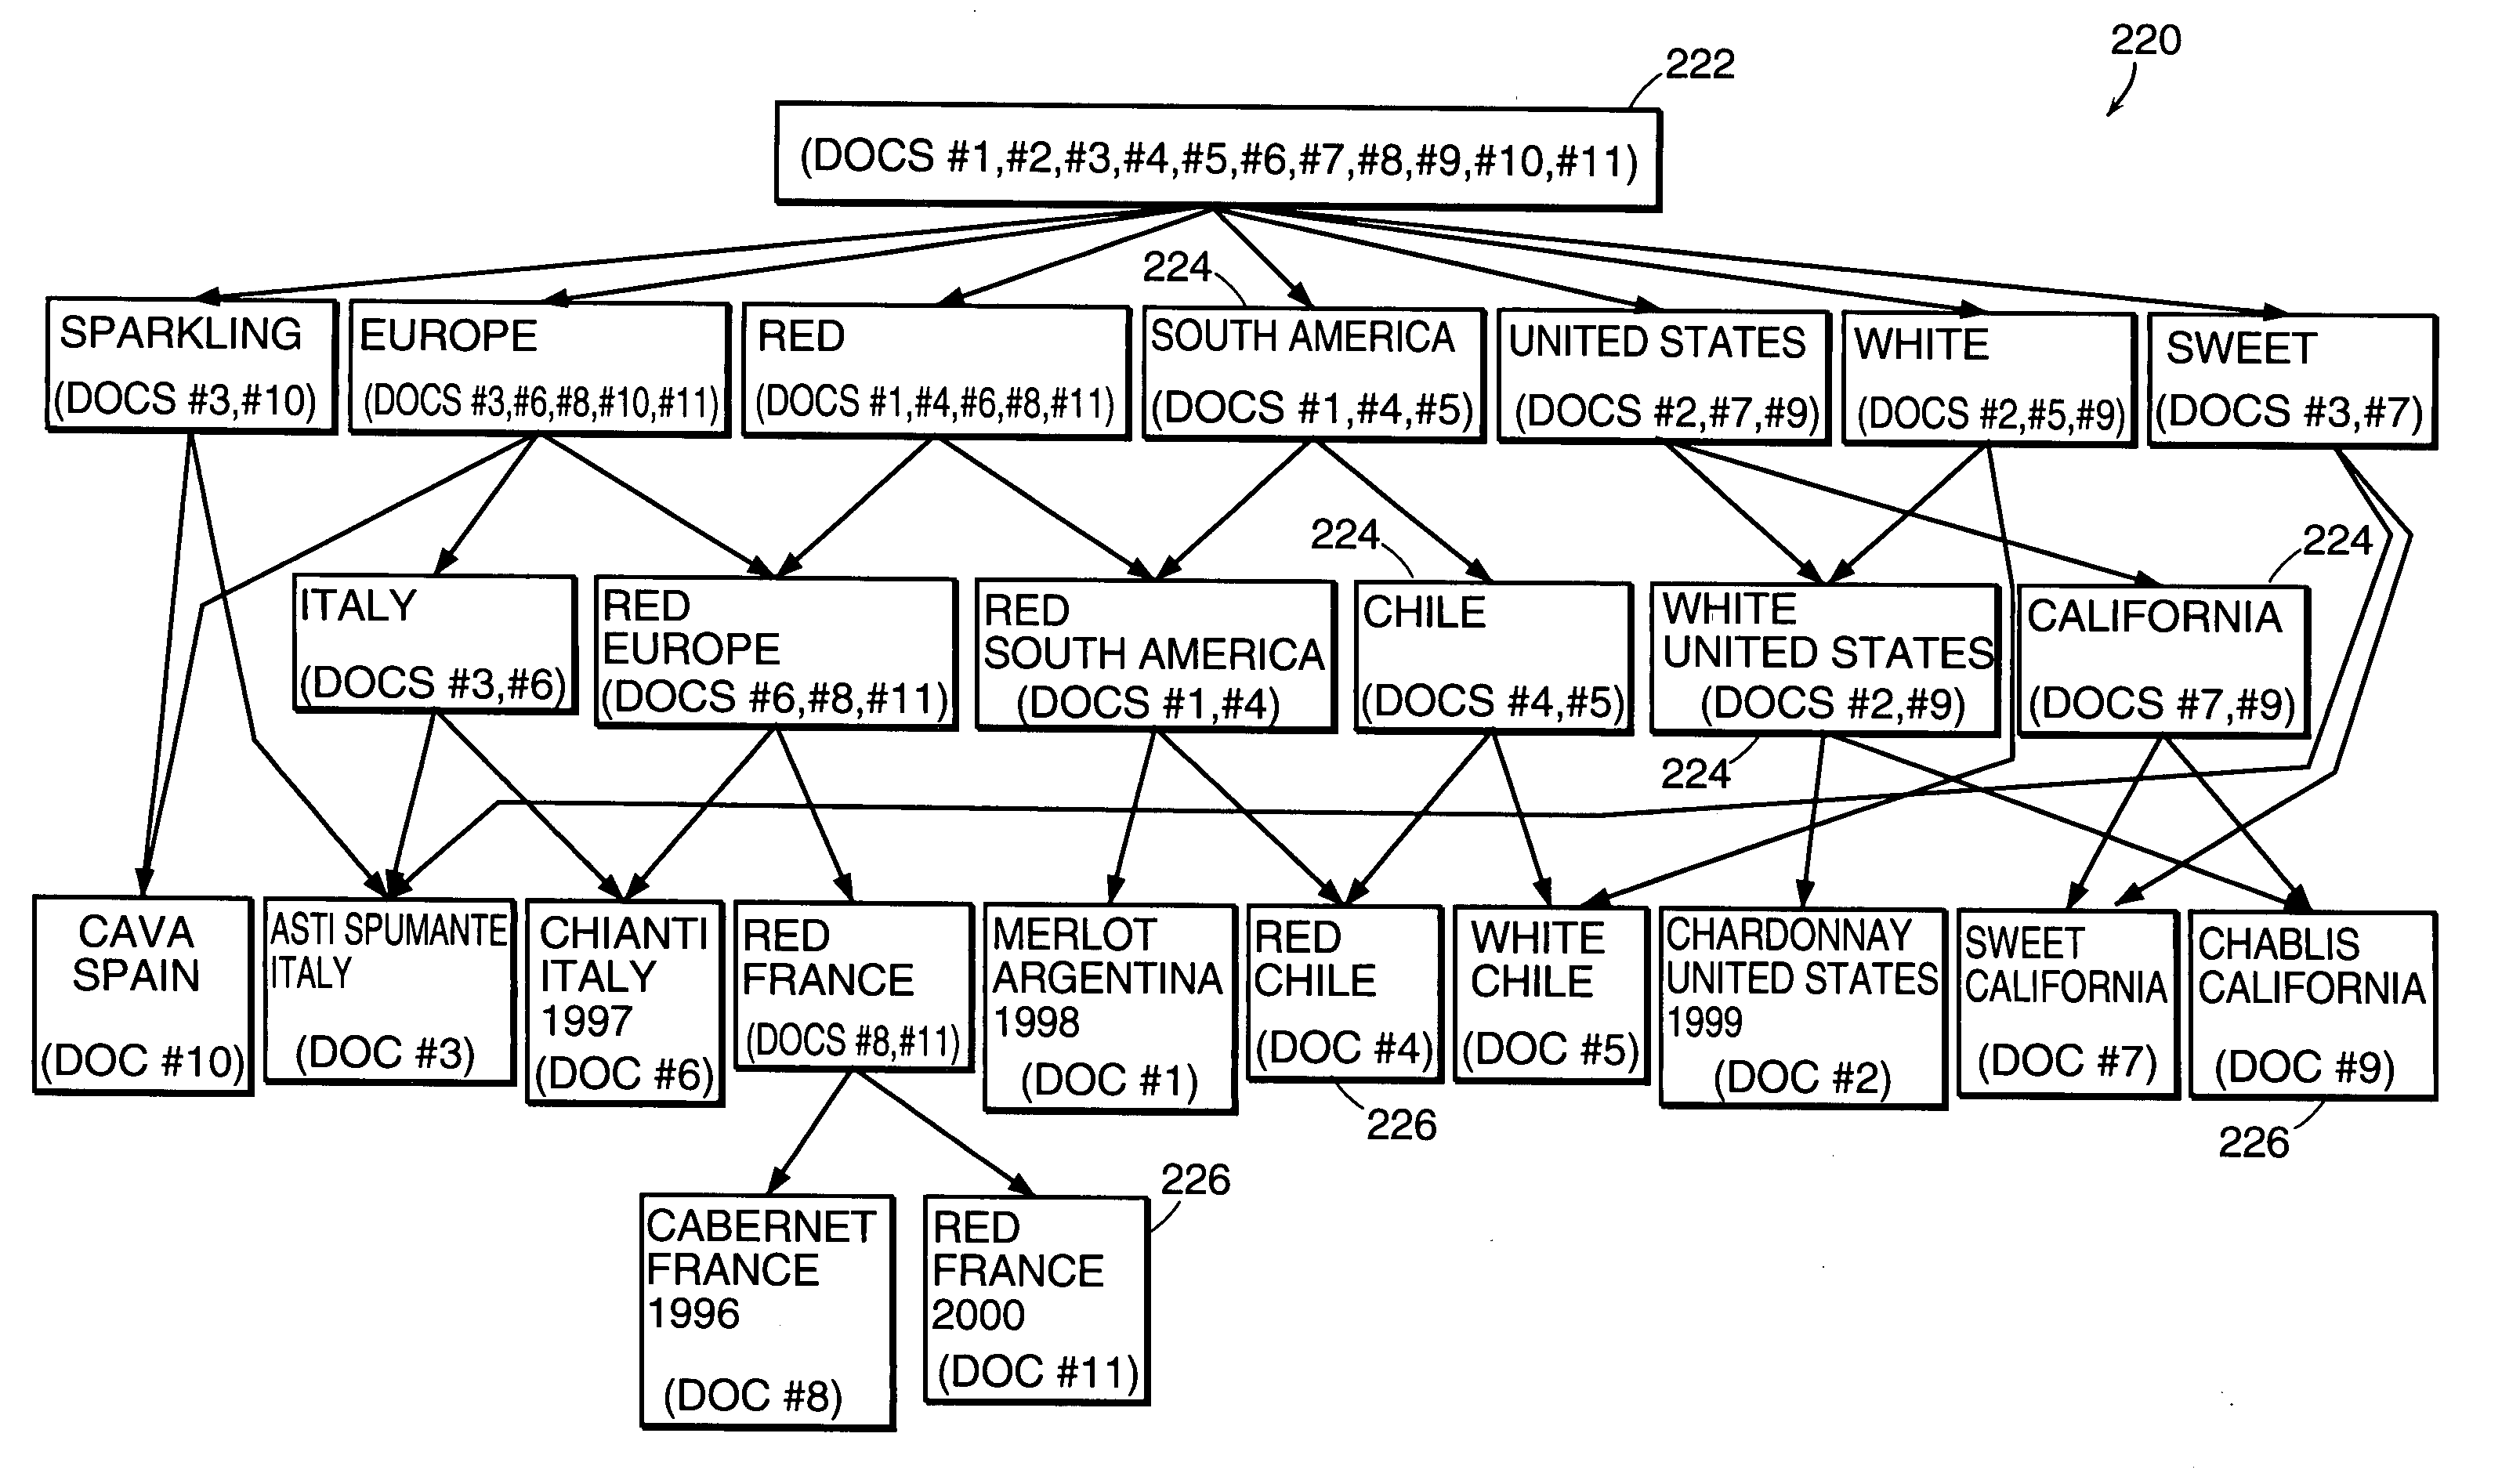 Hierarchical data-driven navigation system and method for information retrieval